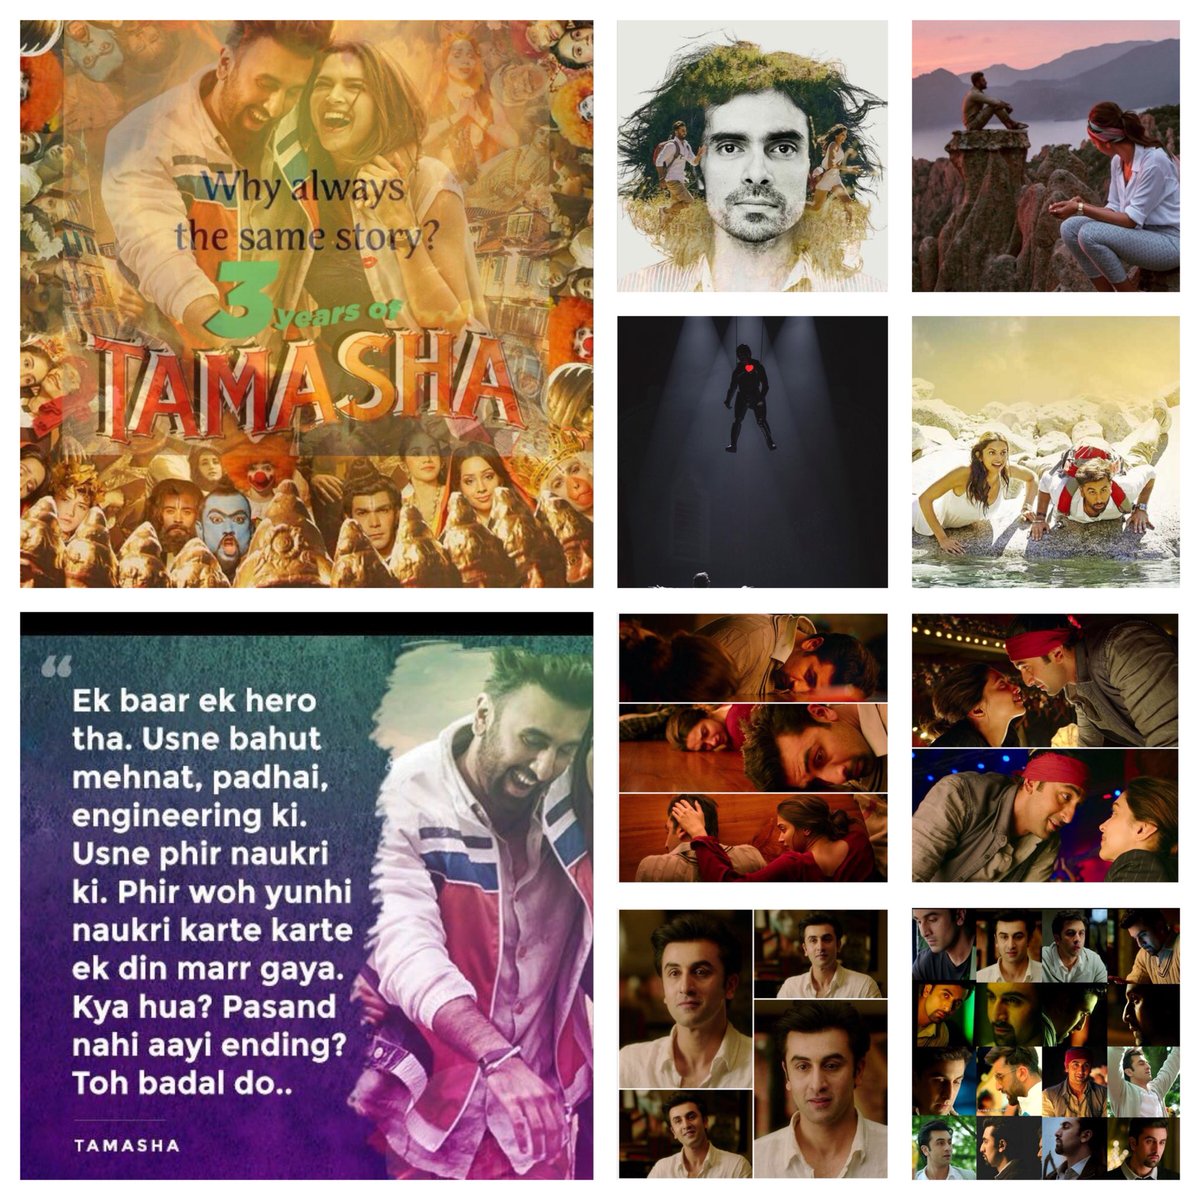 #3YearsOfTamasha

A film that is very close to my heart.A film that accurately mirrored a part of me.A film that grabbed me by my collar and made me restless for weeks that followed.

@ImtiazAliFC 
#Tamasha